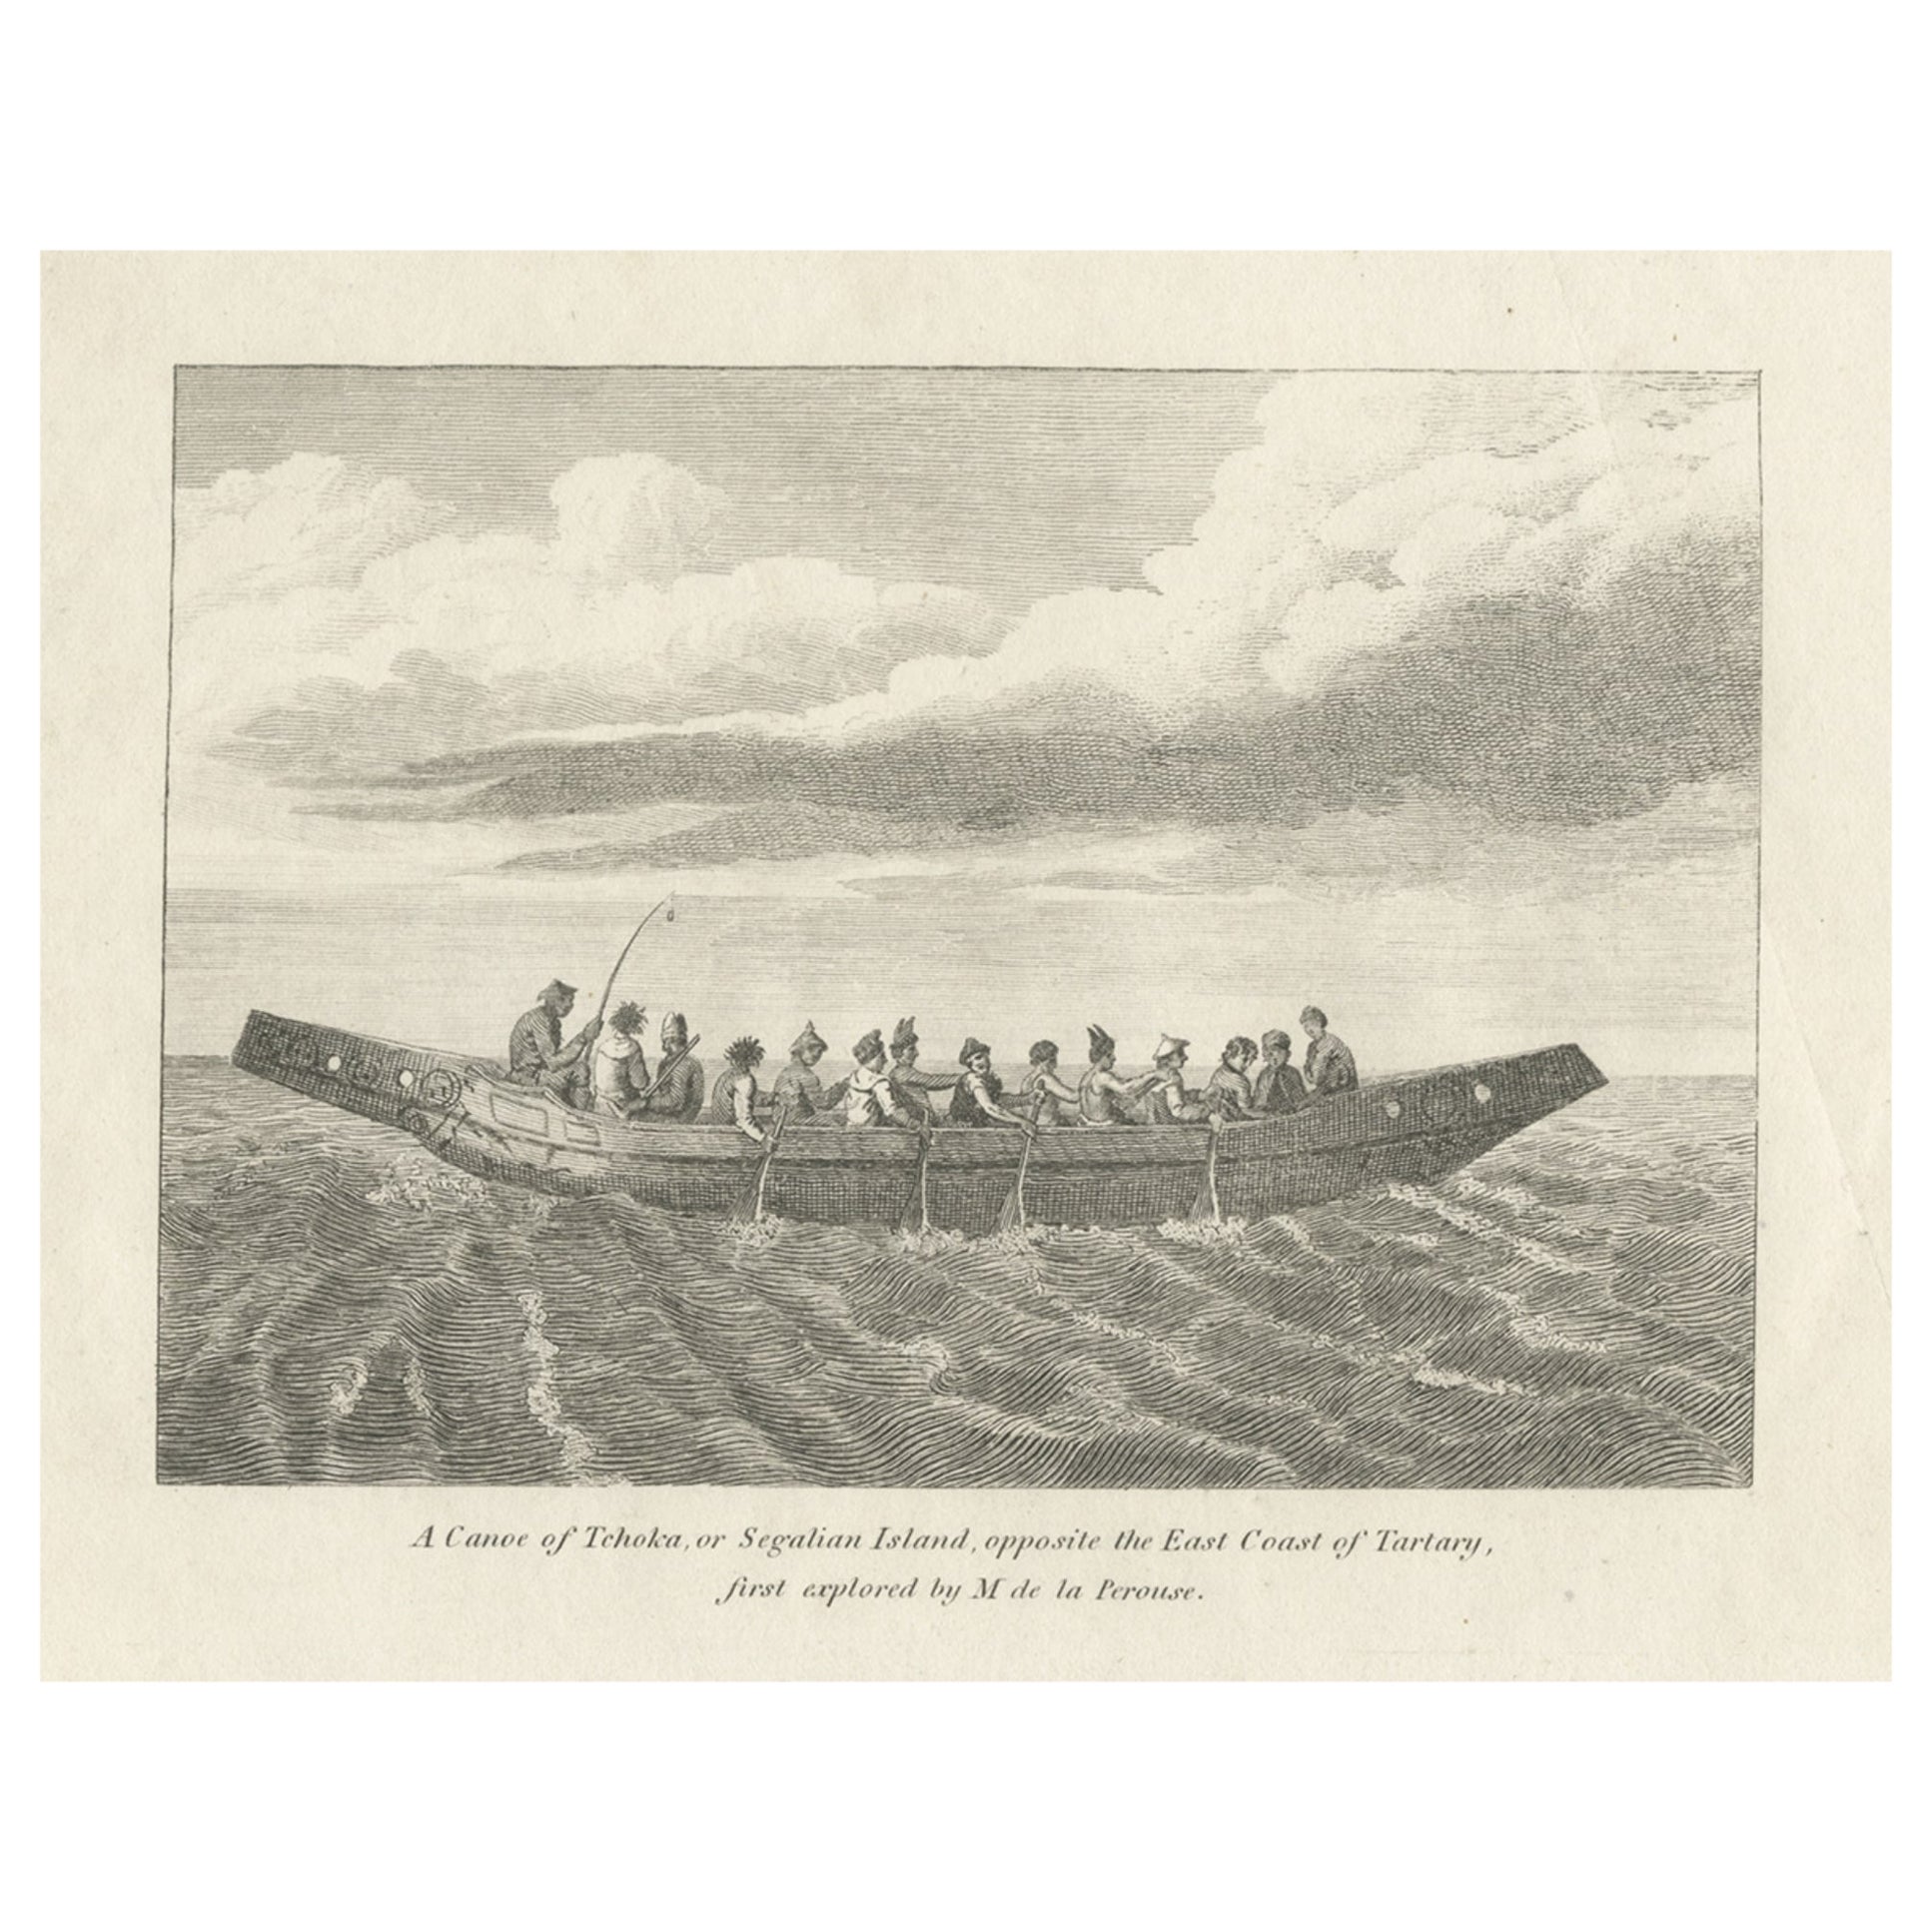 Antique Print of a Canoe of Chukotka, Tartary, 1800 For Sale